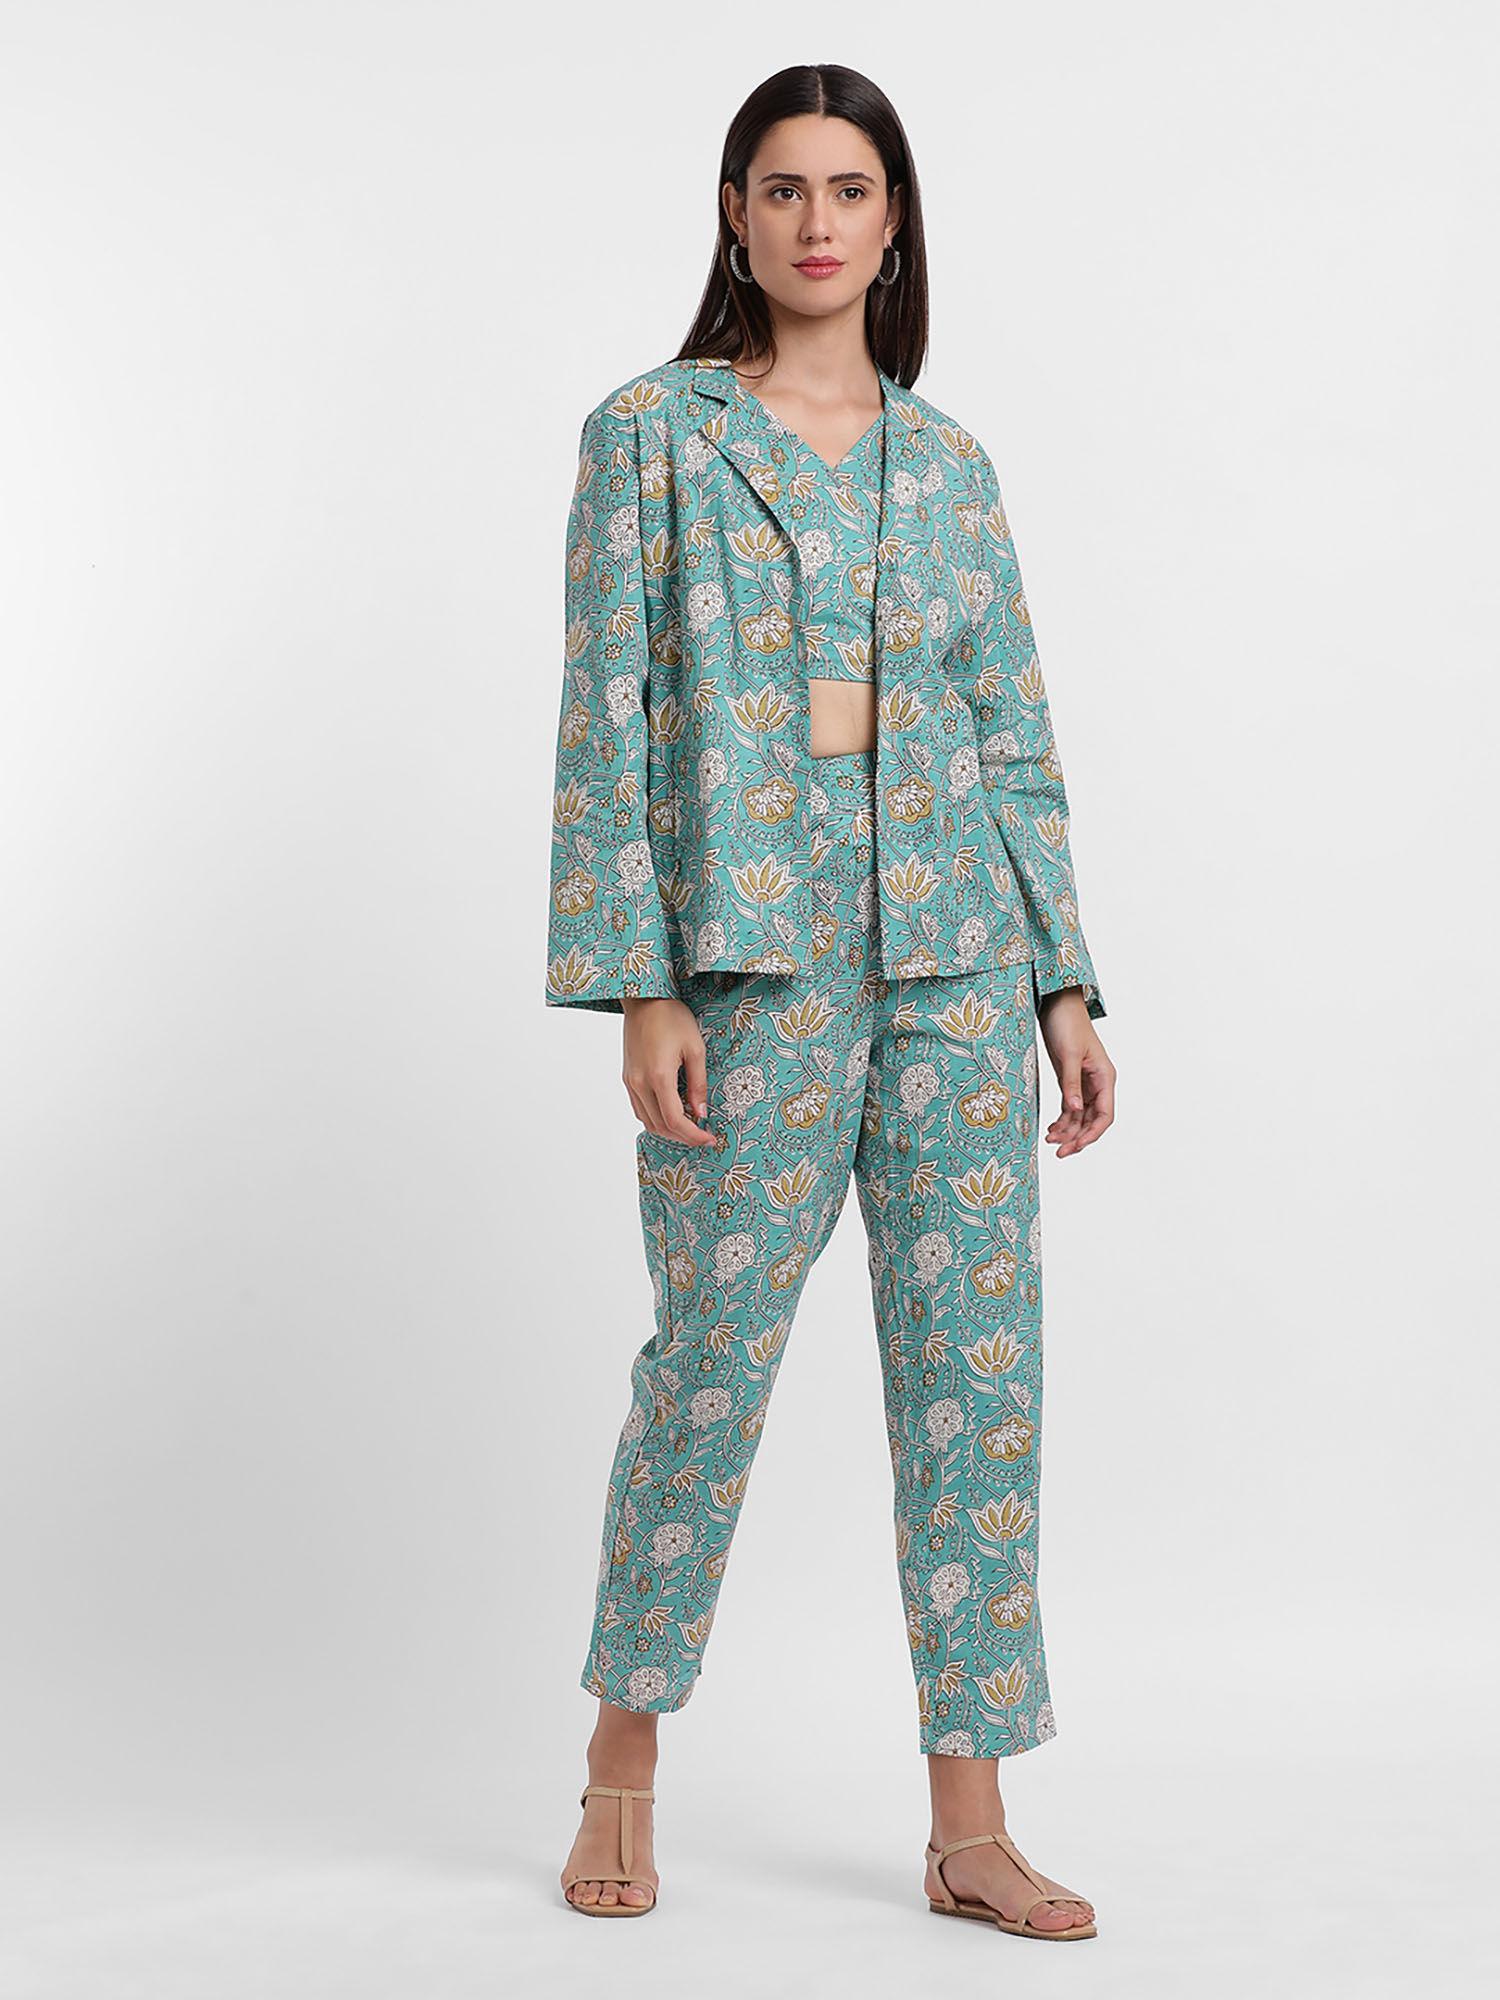 teal printed cotton top with jacket & pant (set of 3)